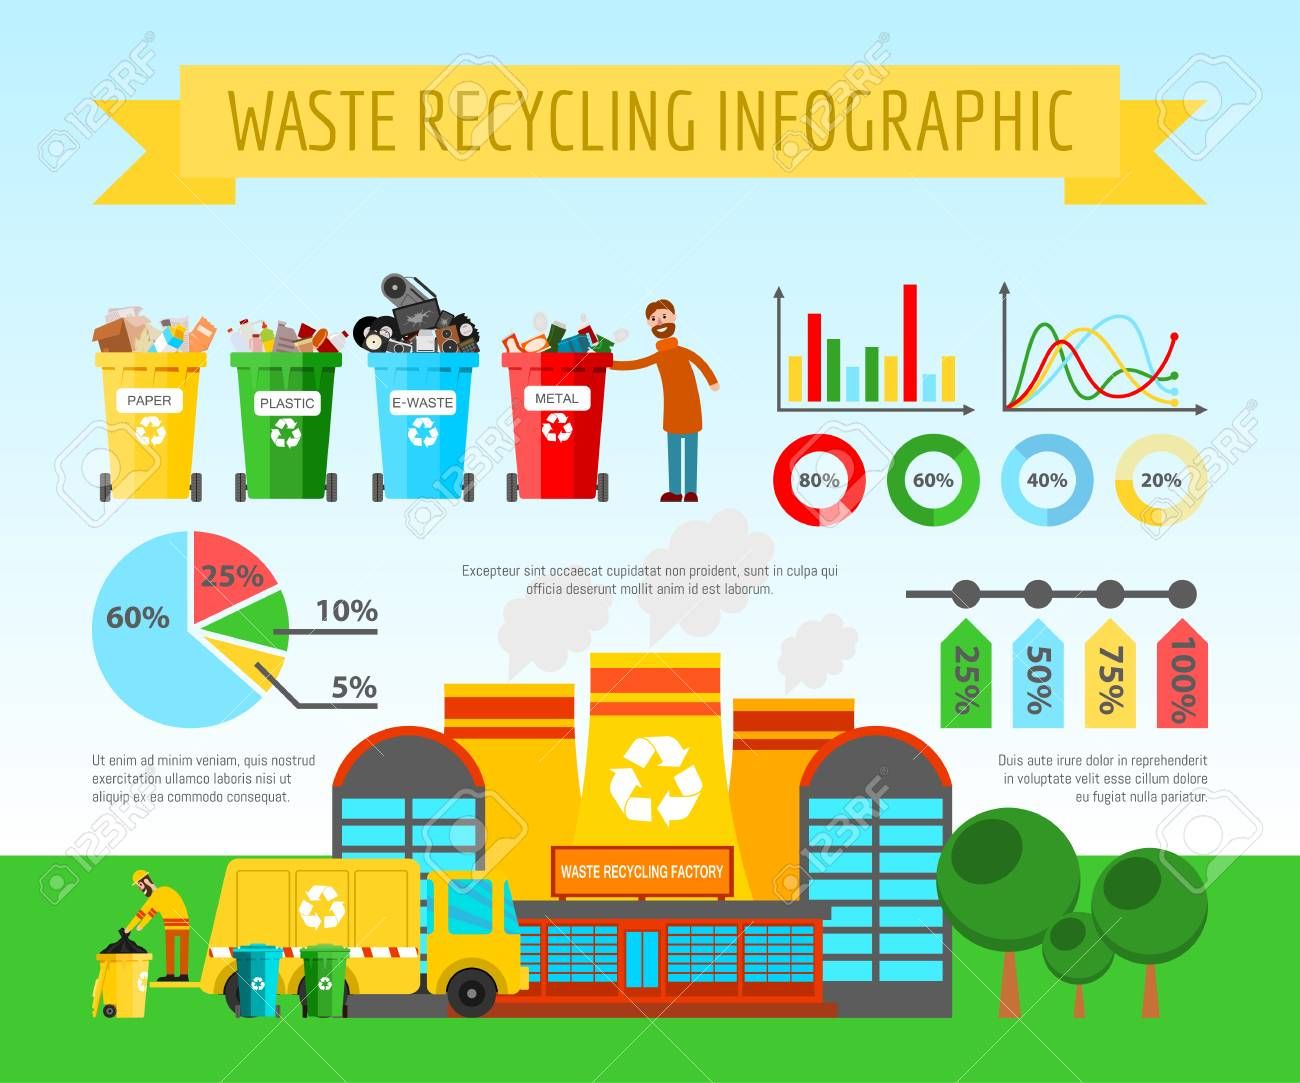 Garbage recycling infographic 453444 - Download Free Vectors, Clipart Graphics & Vector Art